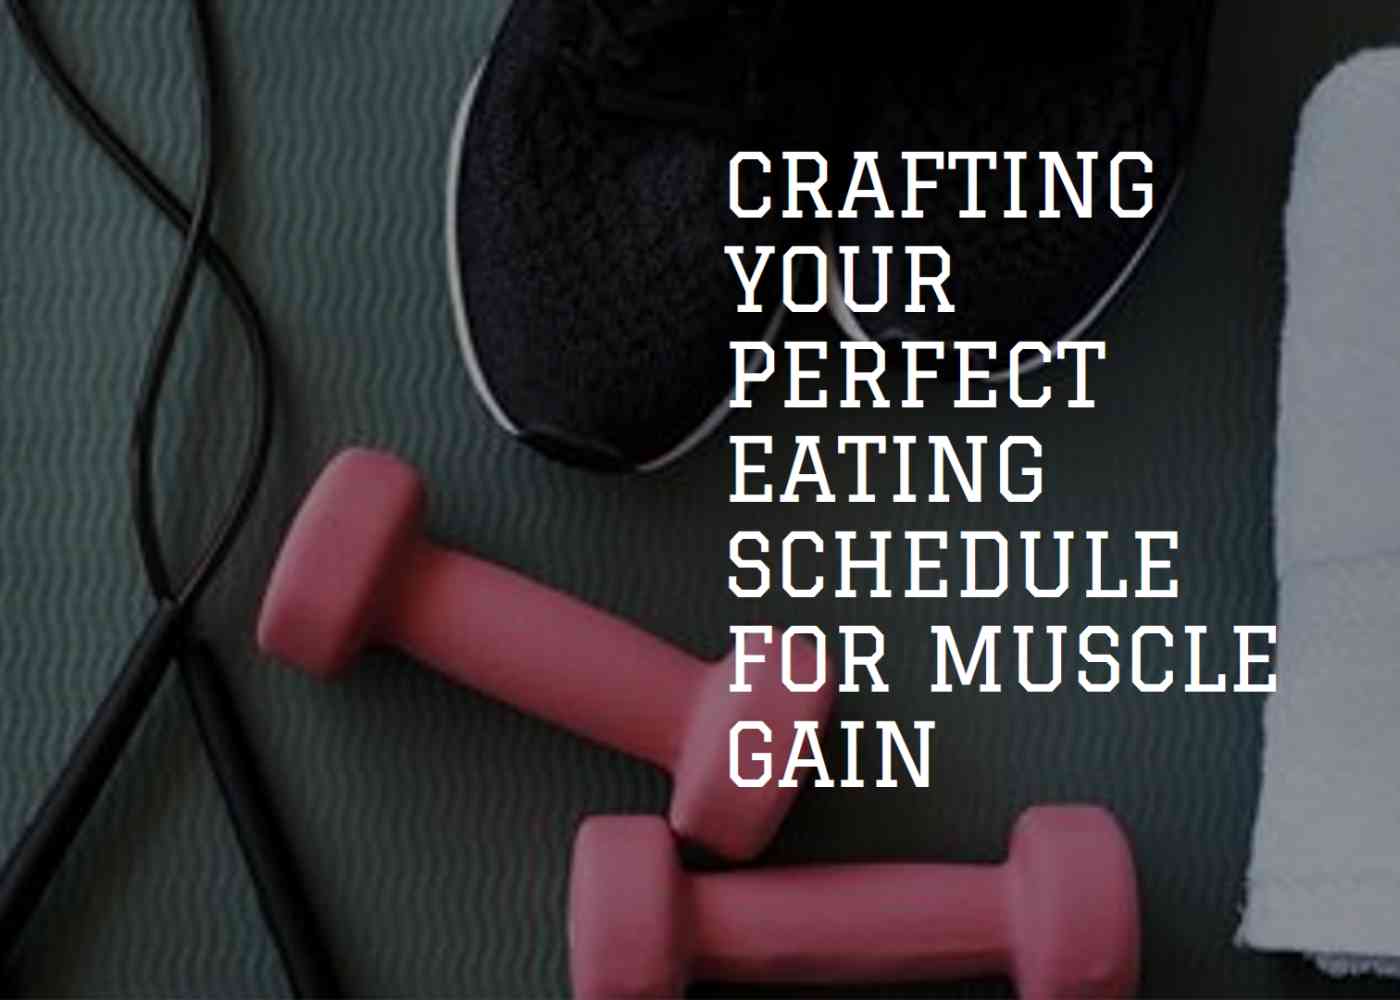 Crafting Your Perfect Eating Schedule for Muscle Gain